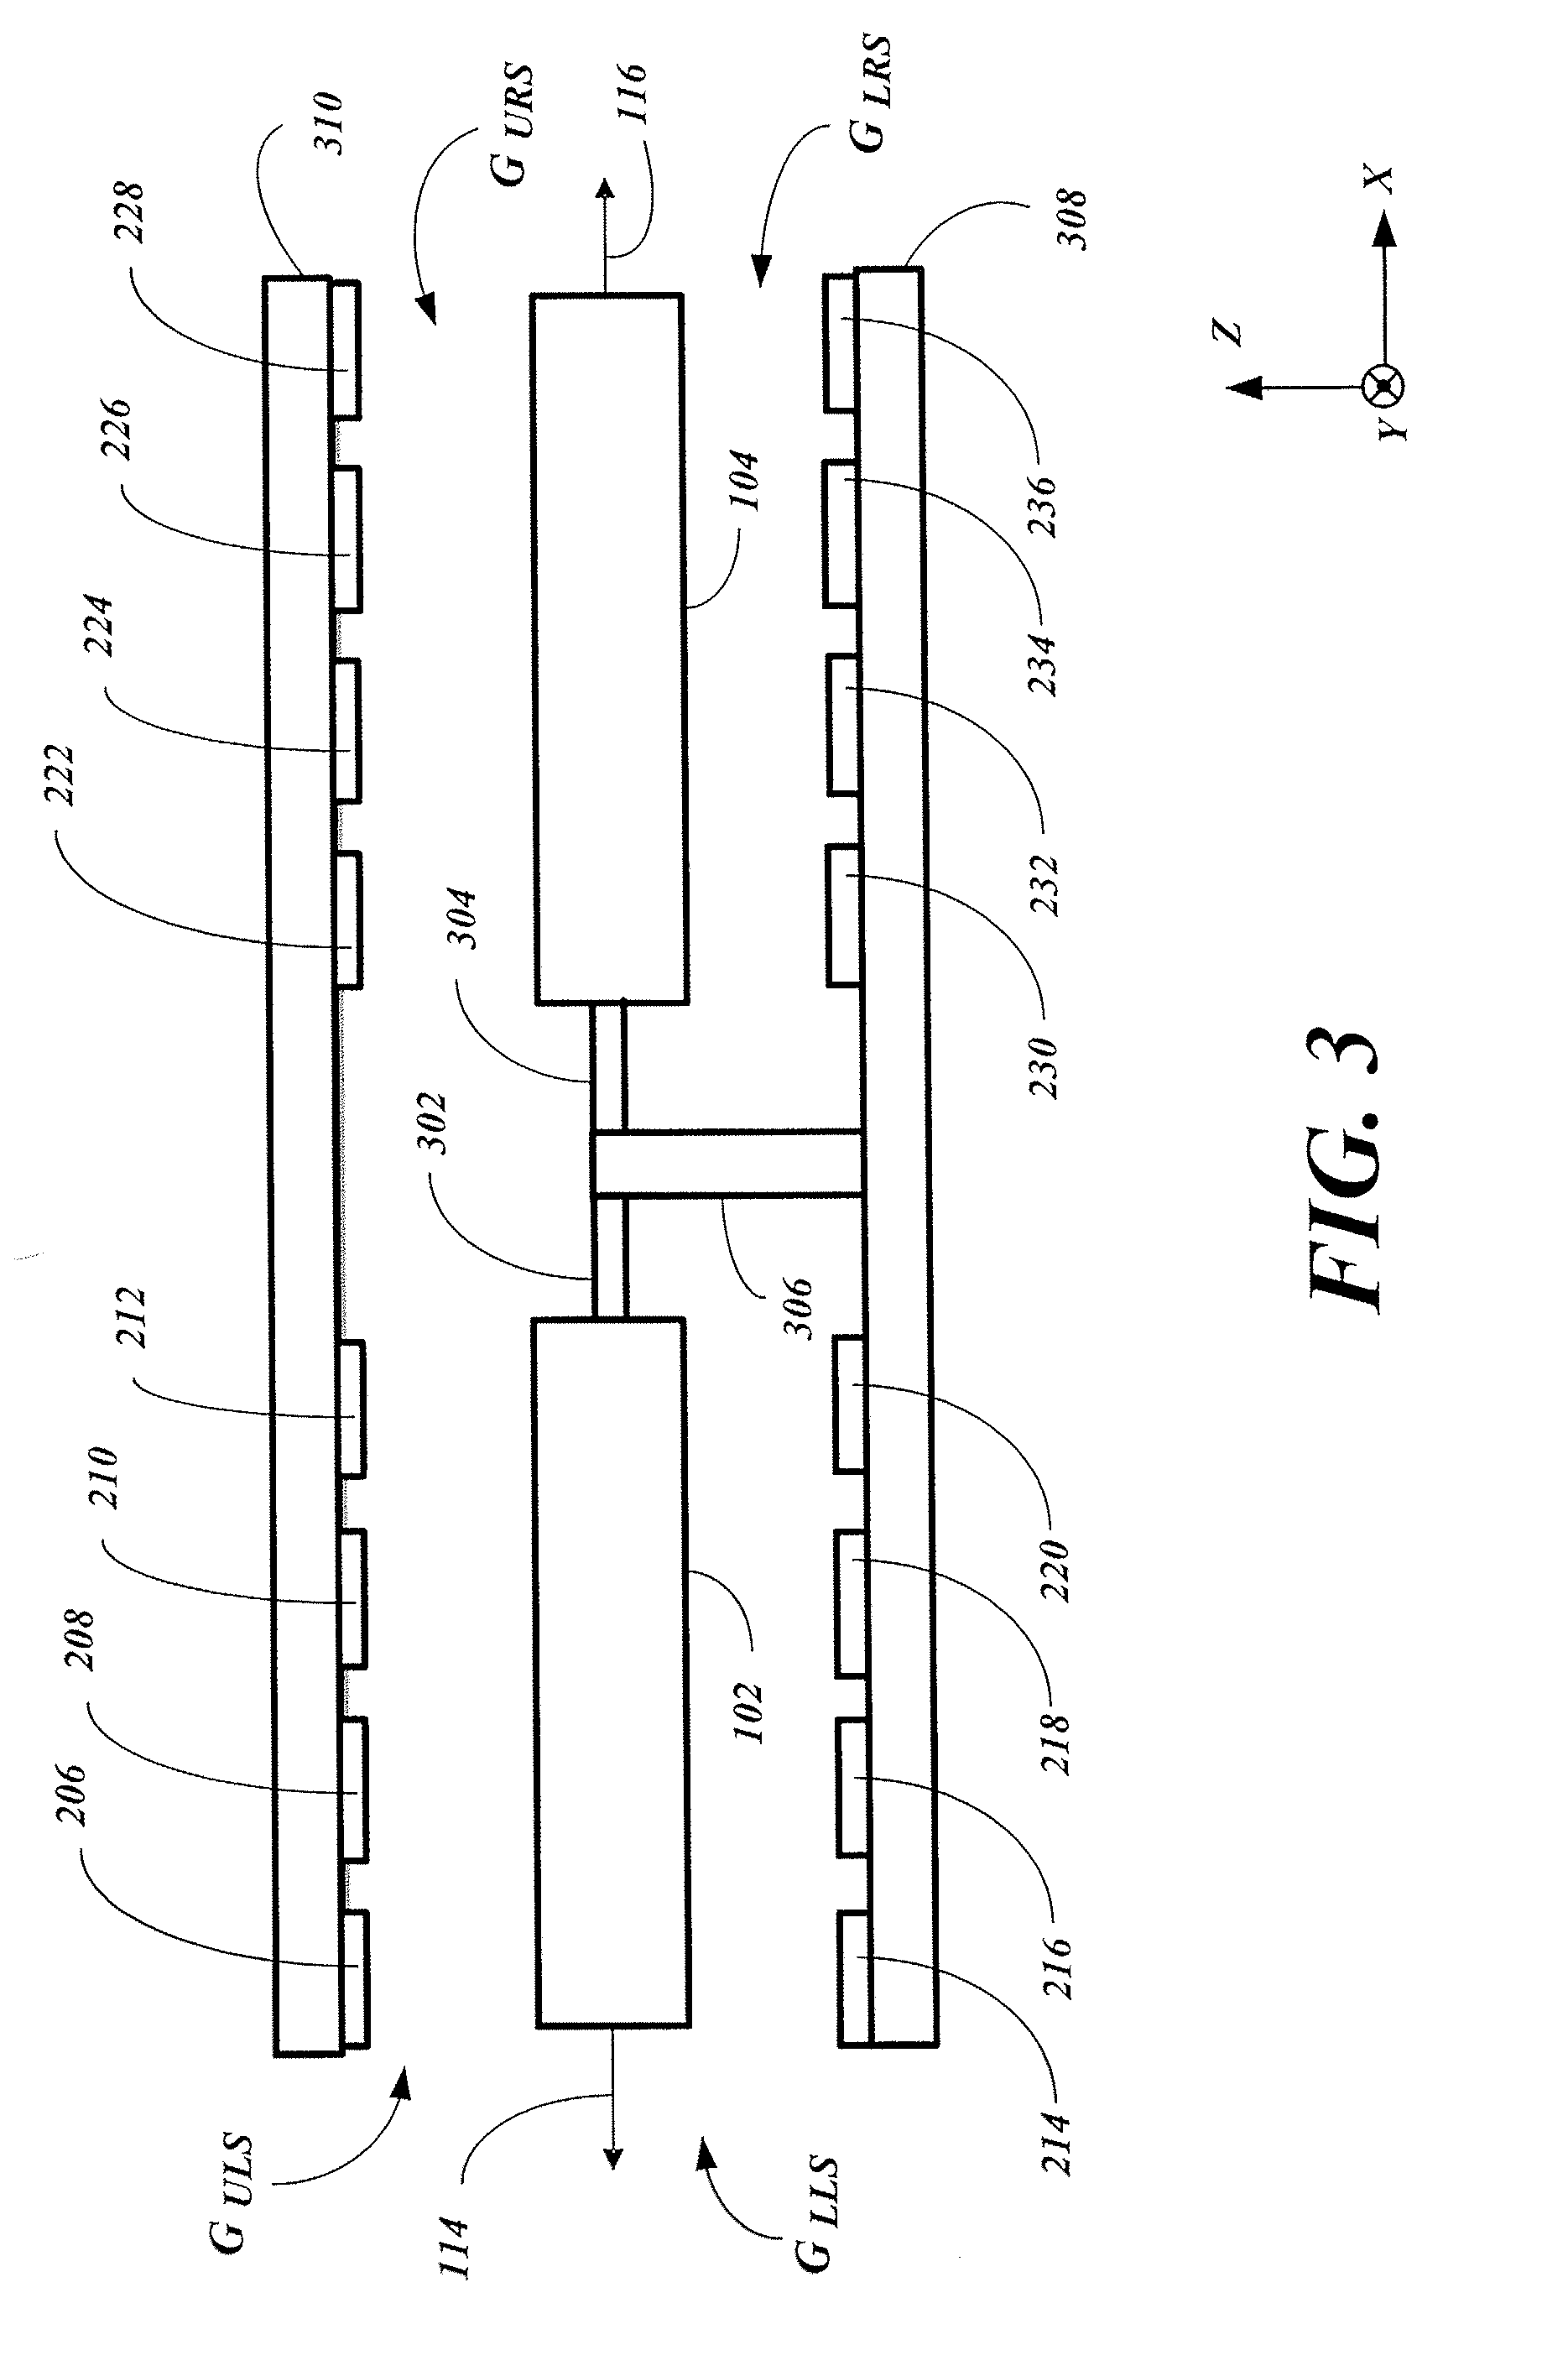 Systems and methods for acceleration and rotational determination from an out-of-plane MEMS device